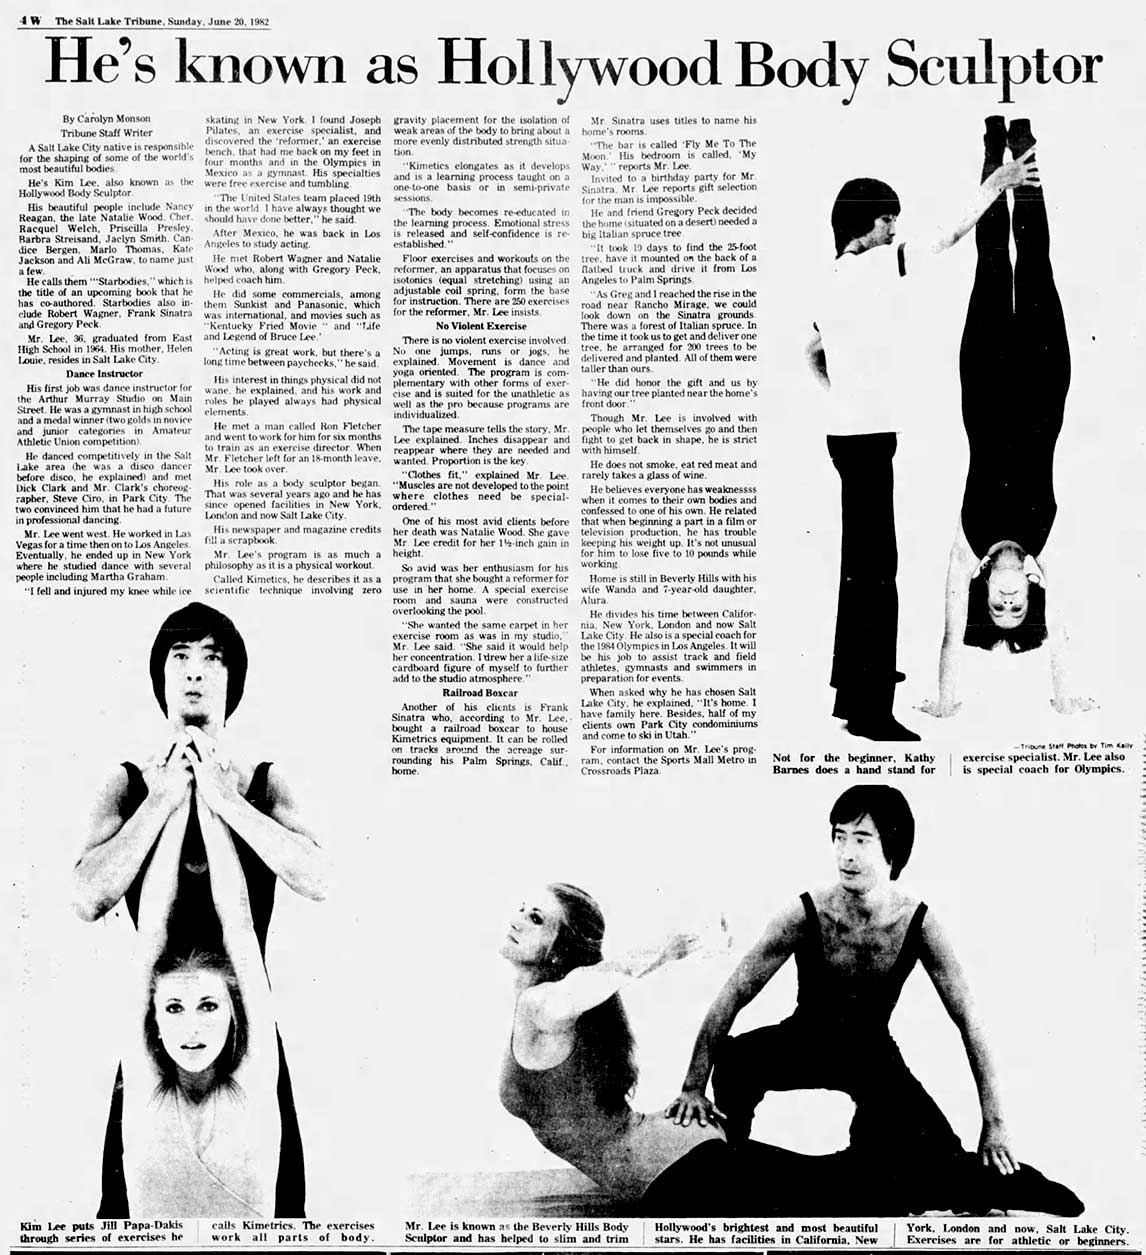 Kim Lee "He's Known as Hollywood Body Sculptor" pilates archive article